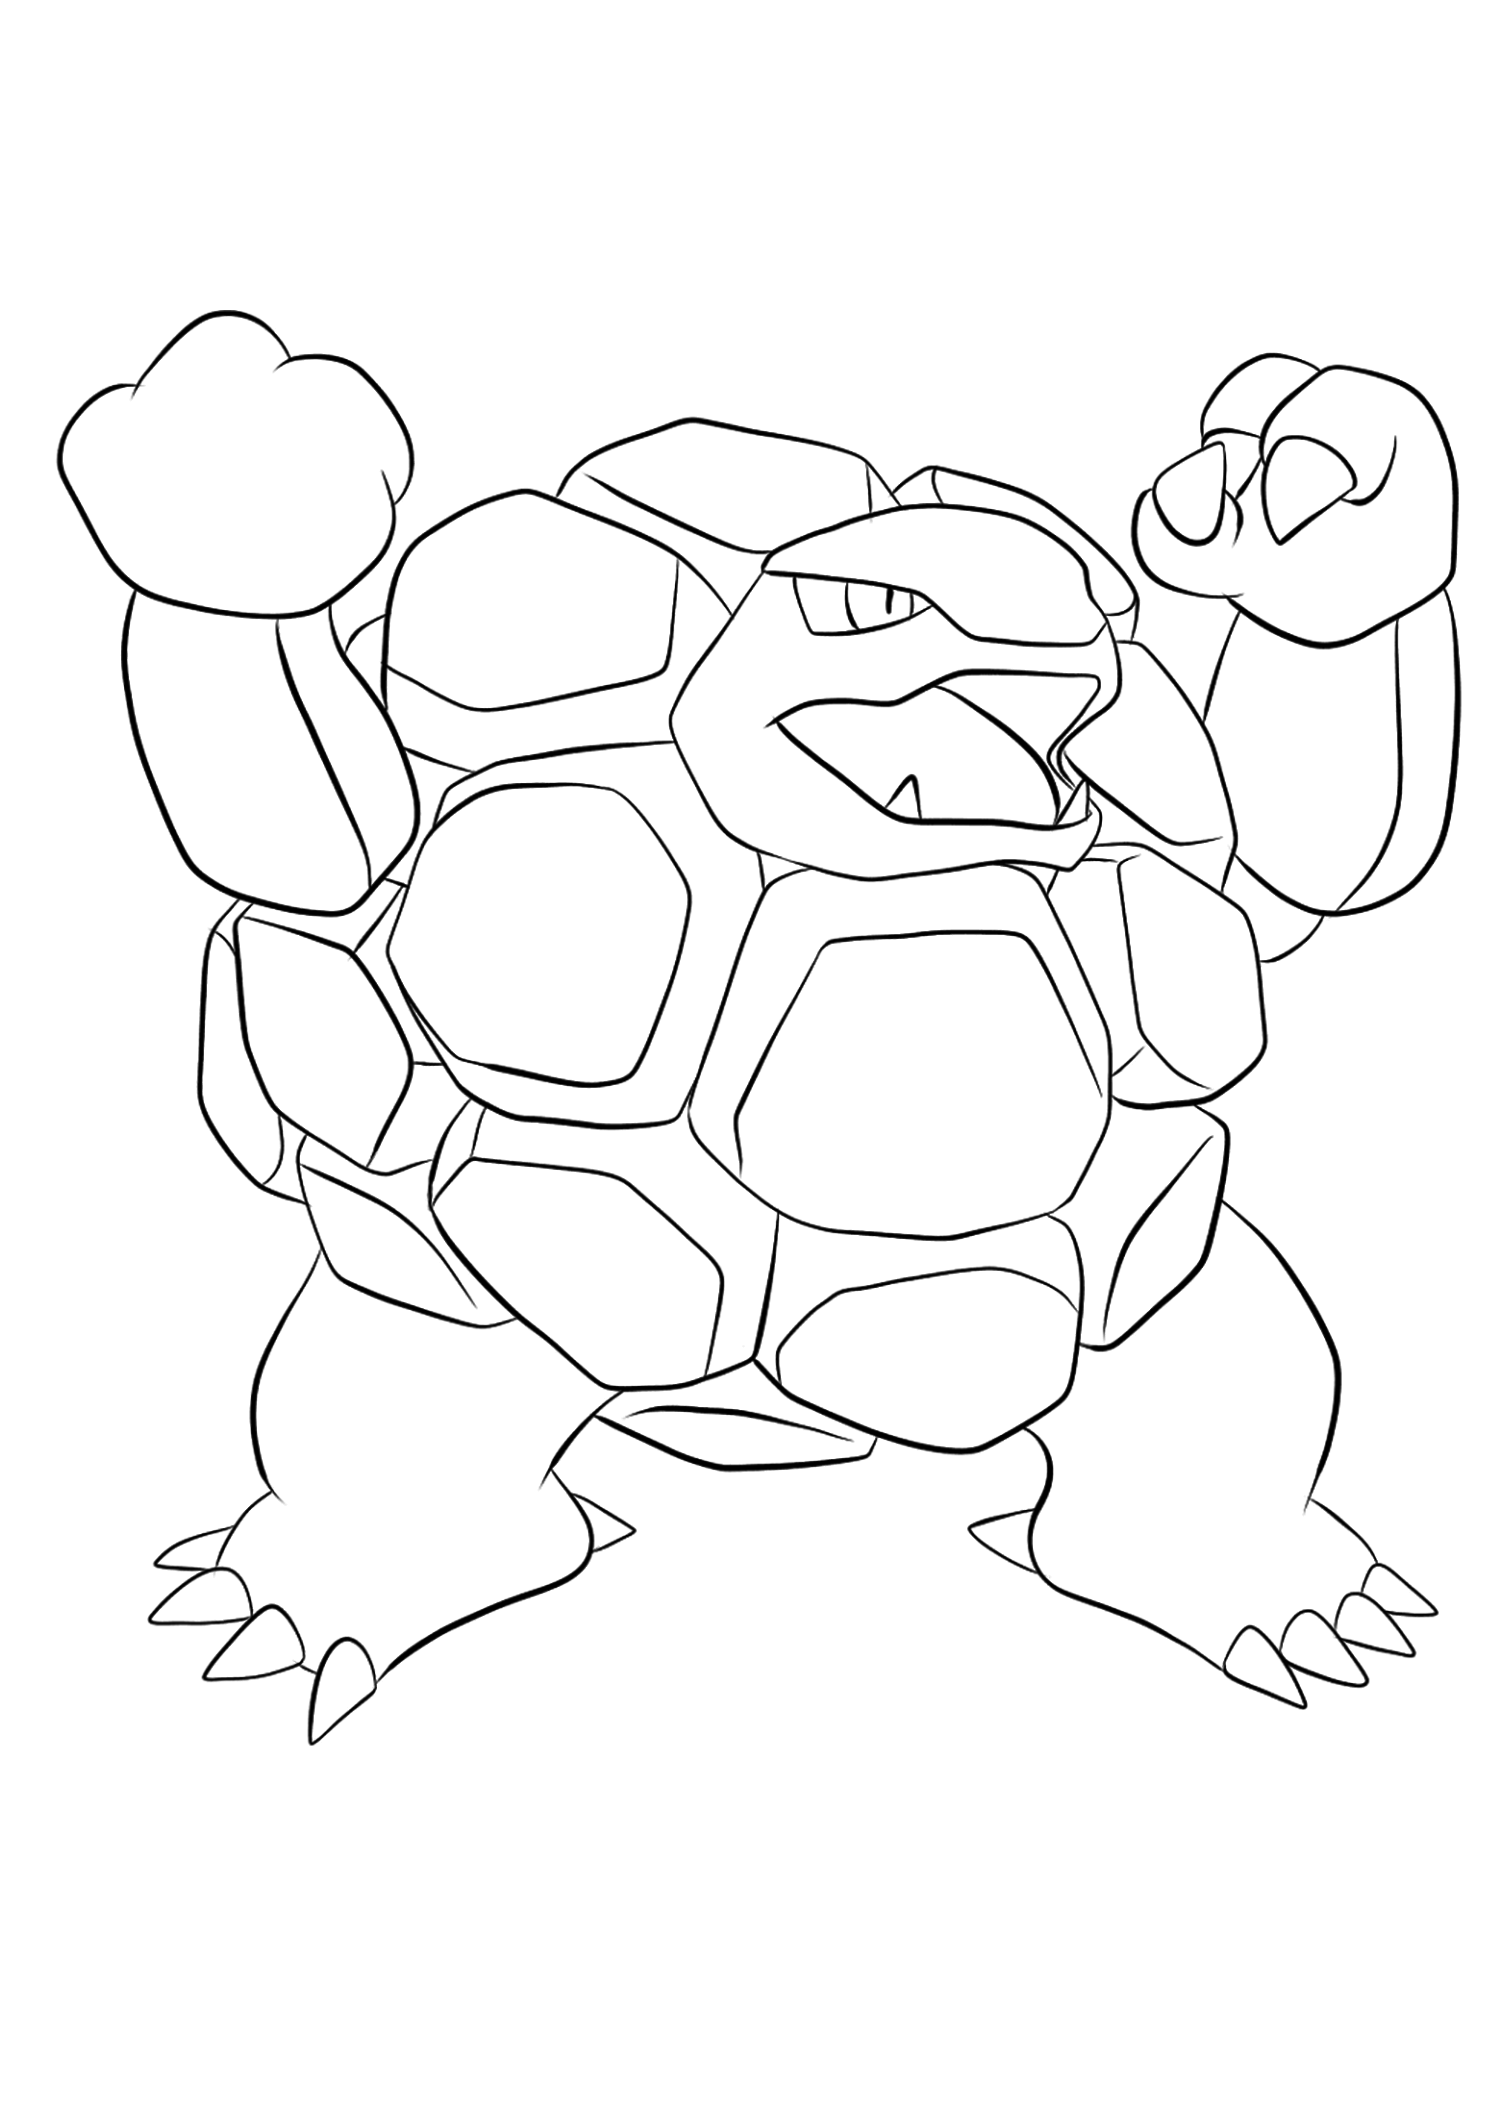 Golem (No.76). Golem Coloring page, Generation I Pokemon of type Rock and ElectrikOriginal image credit: Pokemon linearts by Lilly Gerbil on Deviantart.Permission:  All rights reserved © Pokemon company and Ken Sugimori.